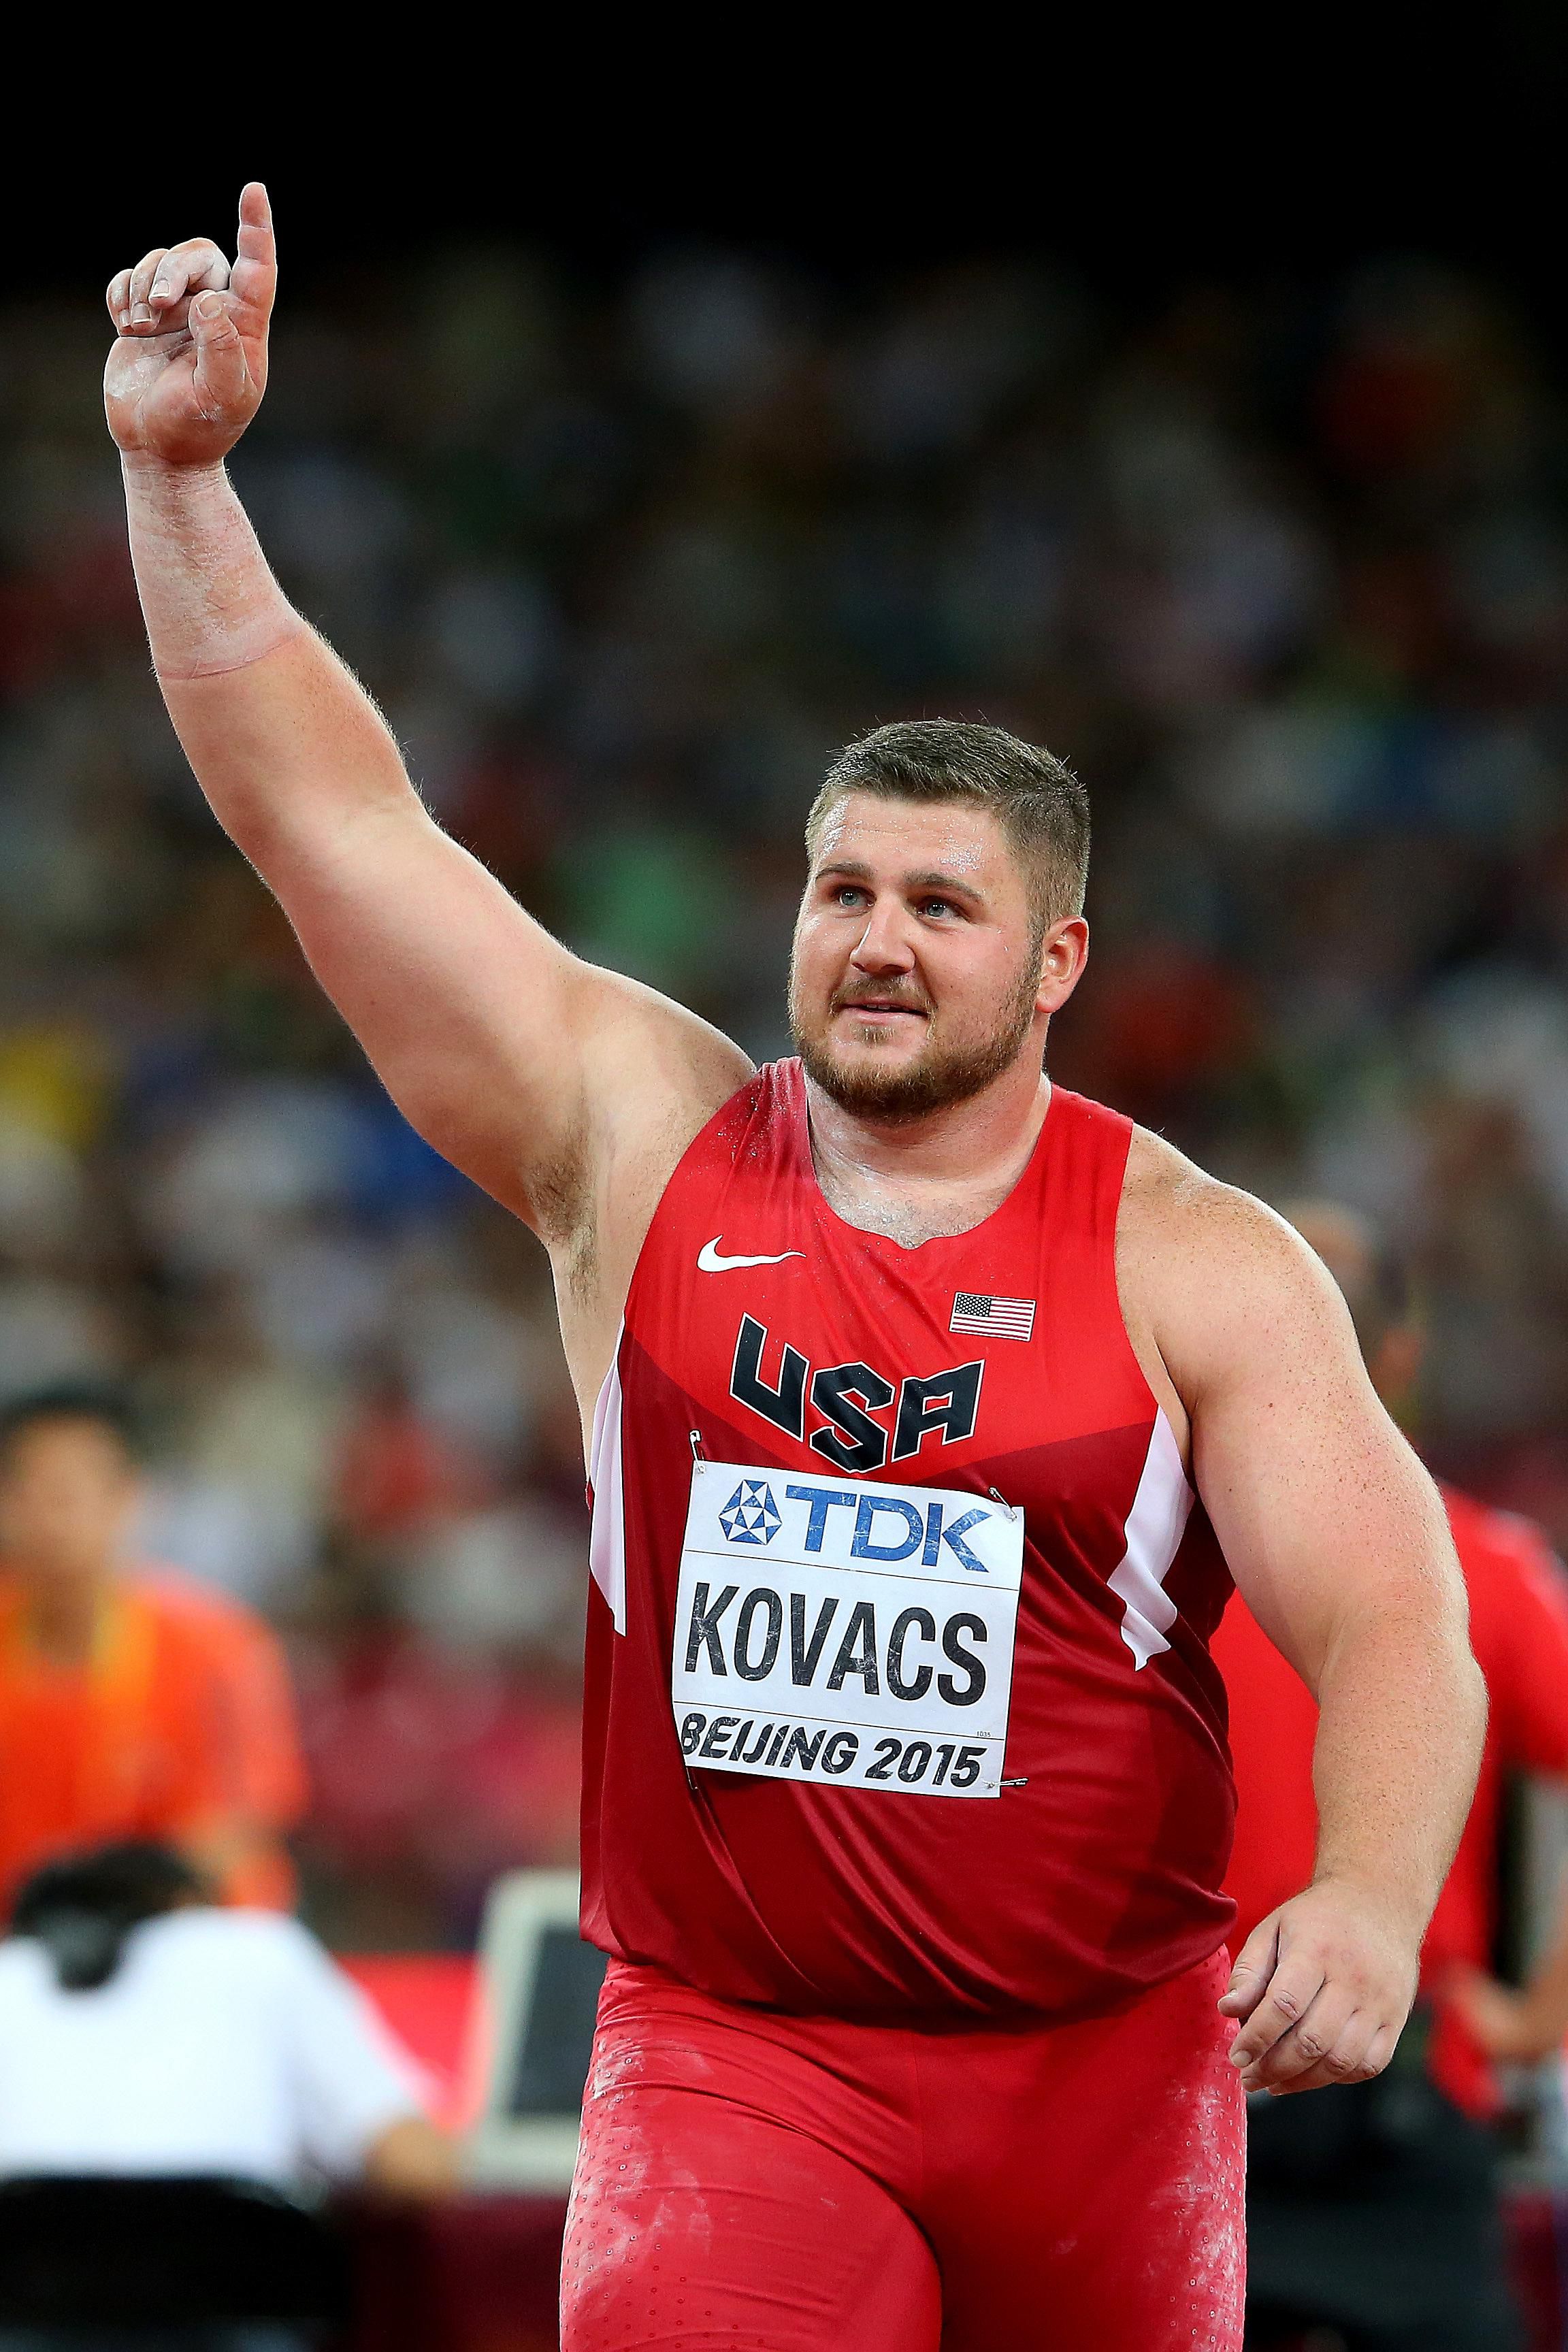 Joe Kovacs: Shot Put Star Rises from Parking Lot to the Medals Stand